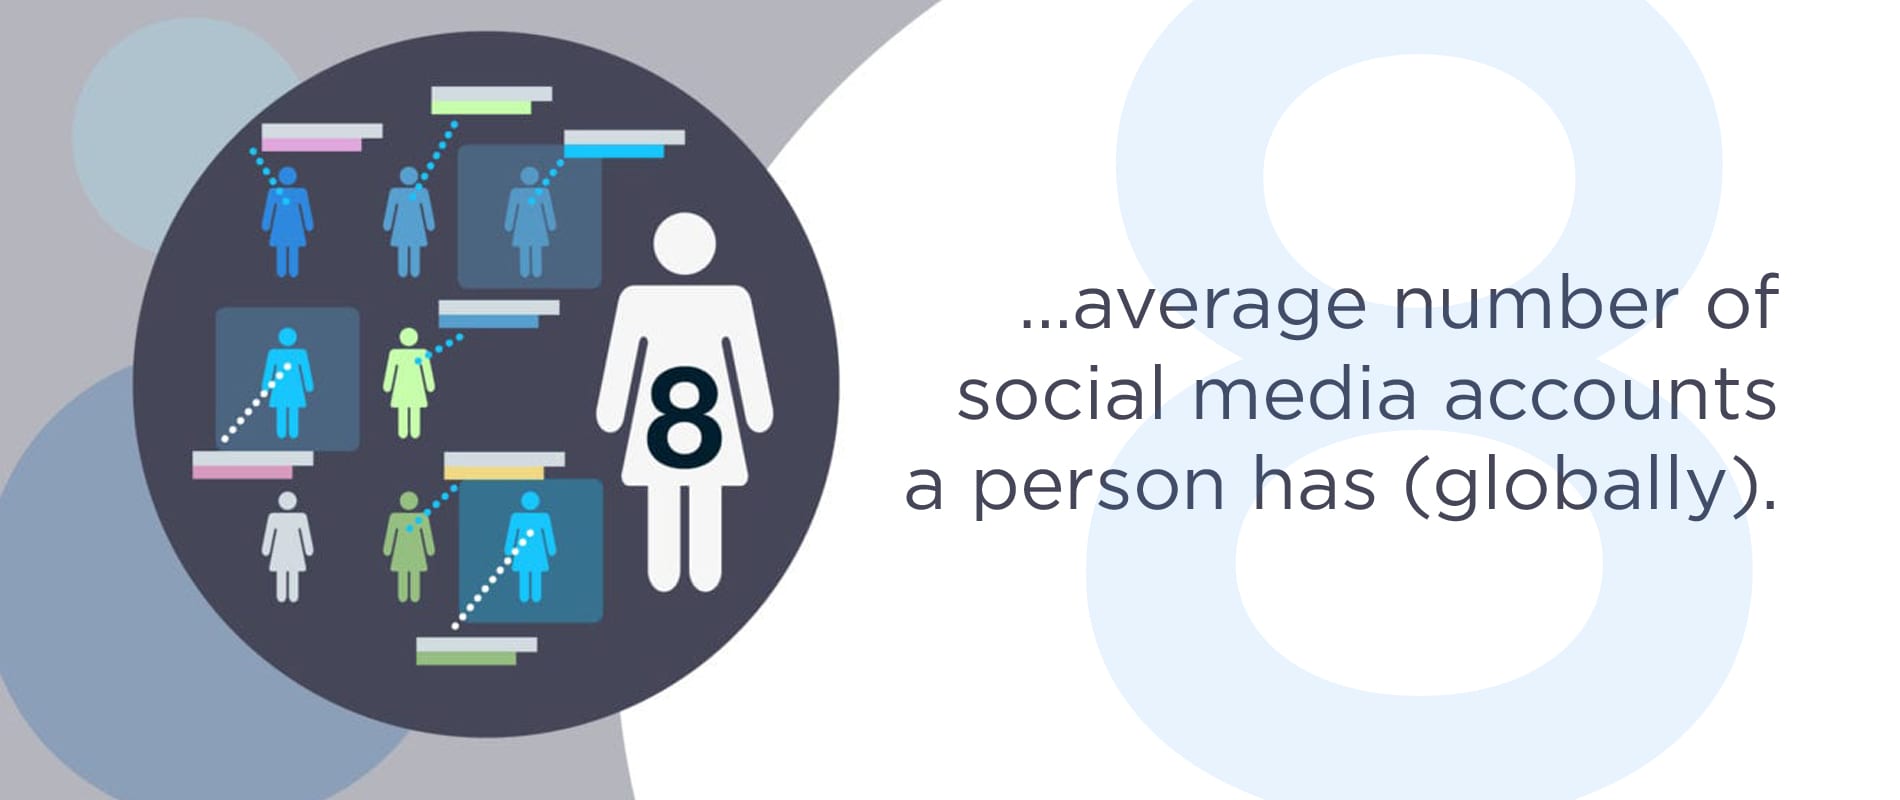 Infographic showing average number of social accounts per person